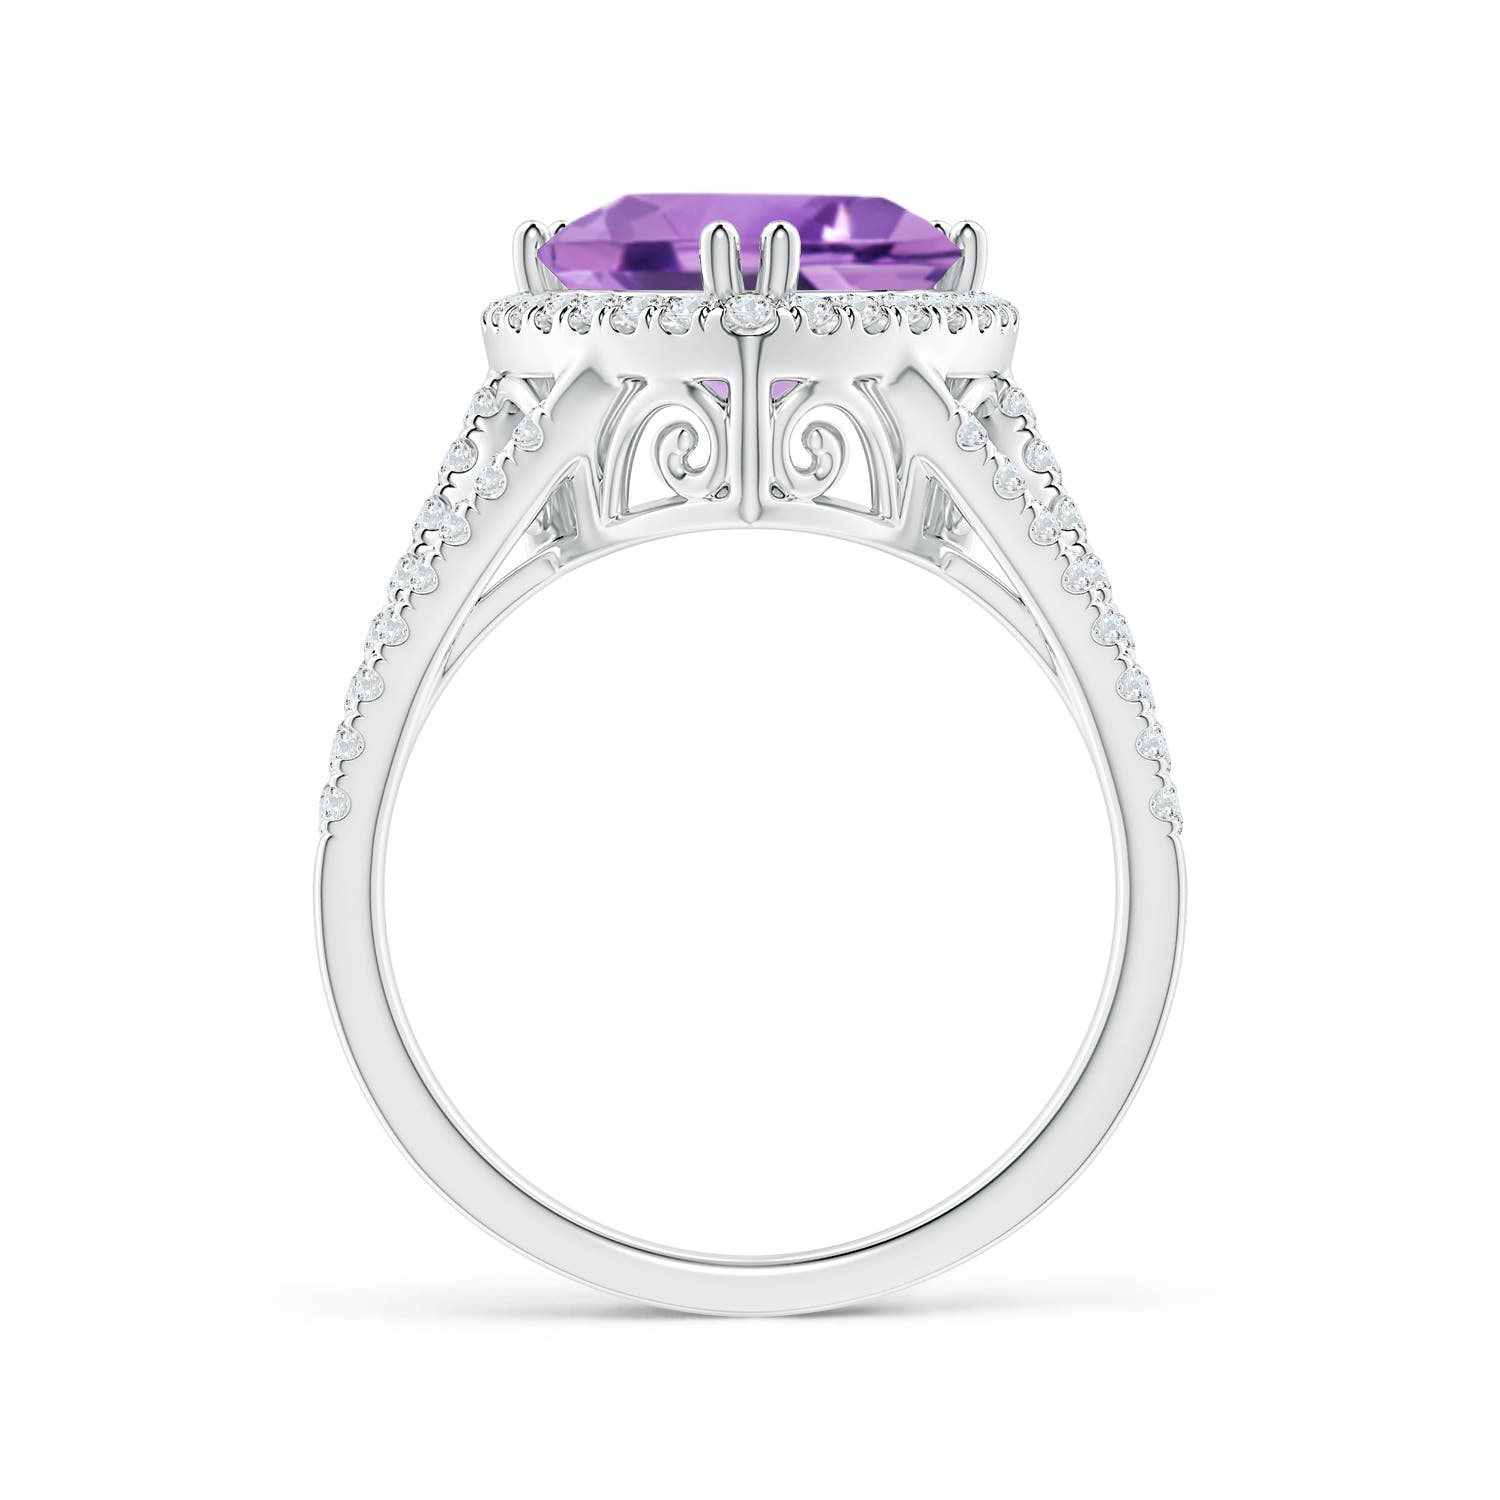 A - Amethyst / 3.16 CT / 14 KT White Gold